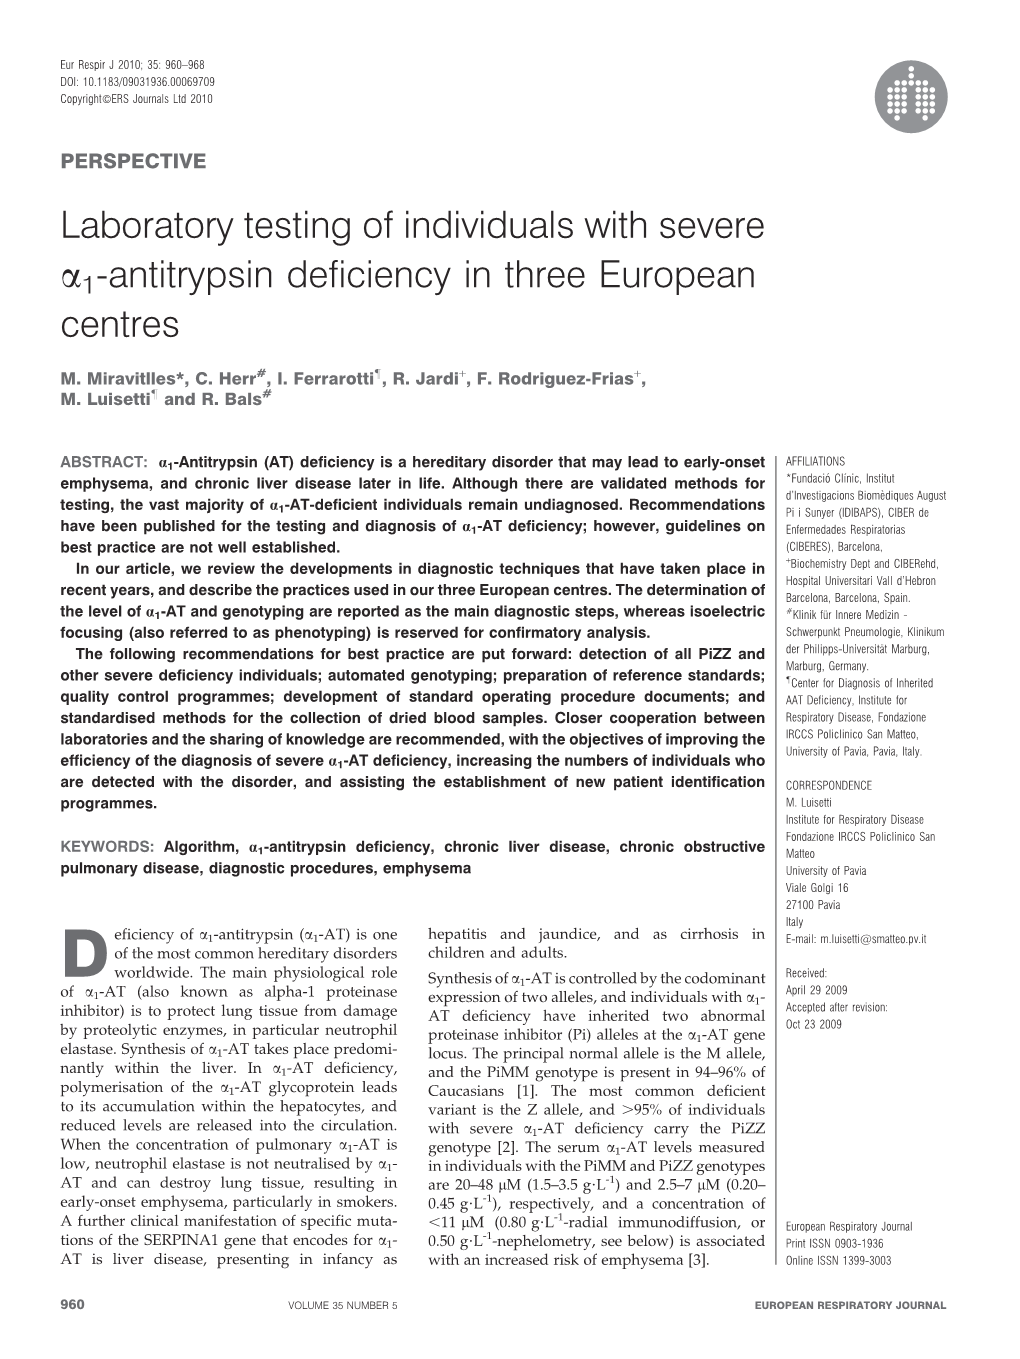 Laboratory Testing of Individuals with Severe O1-Antitrypsin Deficiency In